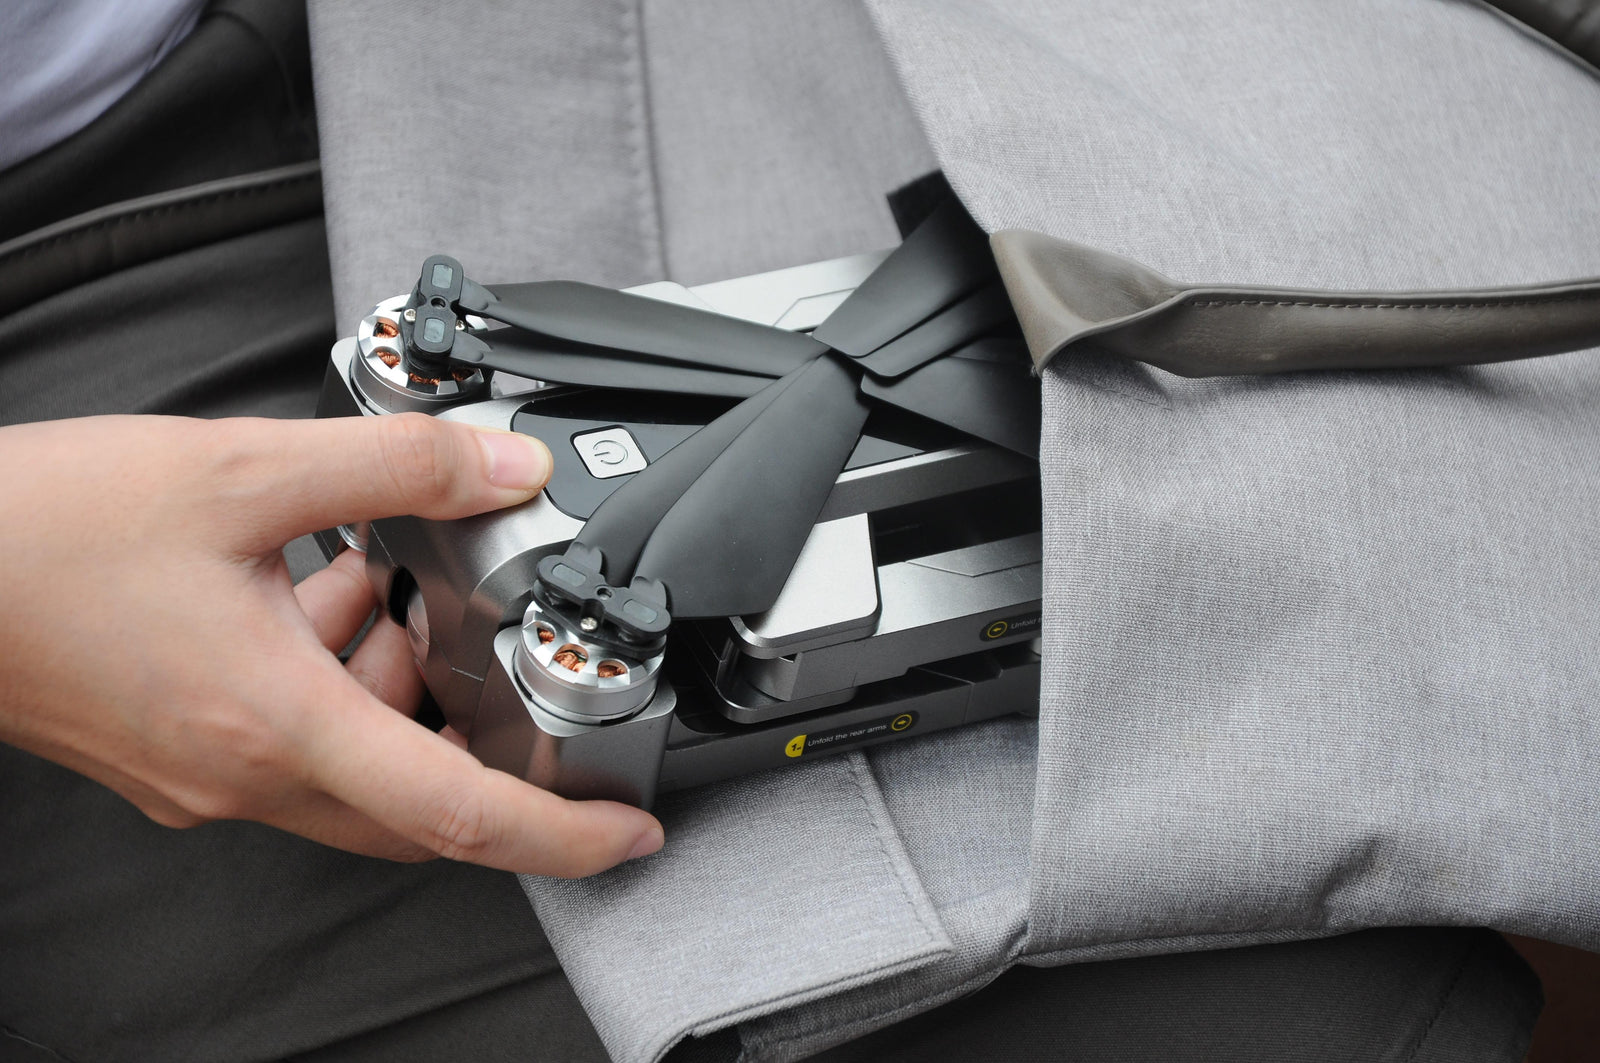 Things You Need to Know Before Travelling With a Drone